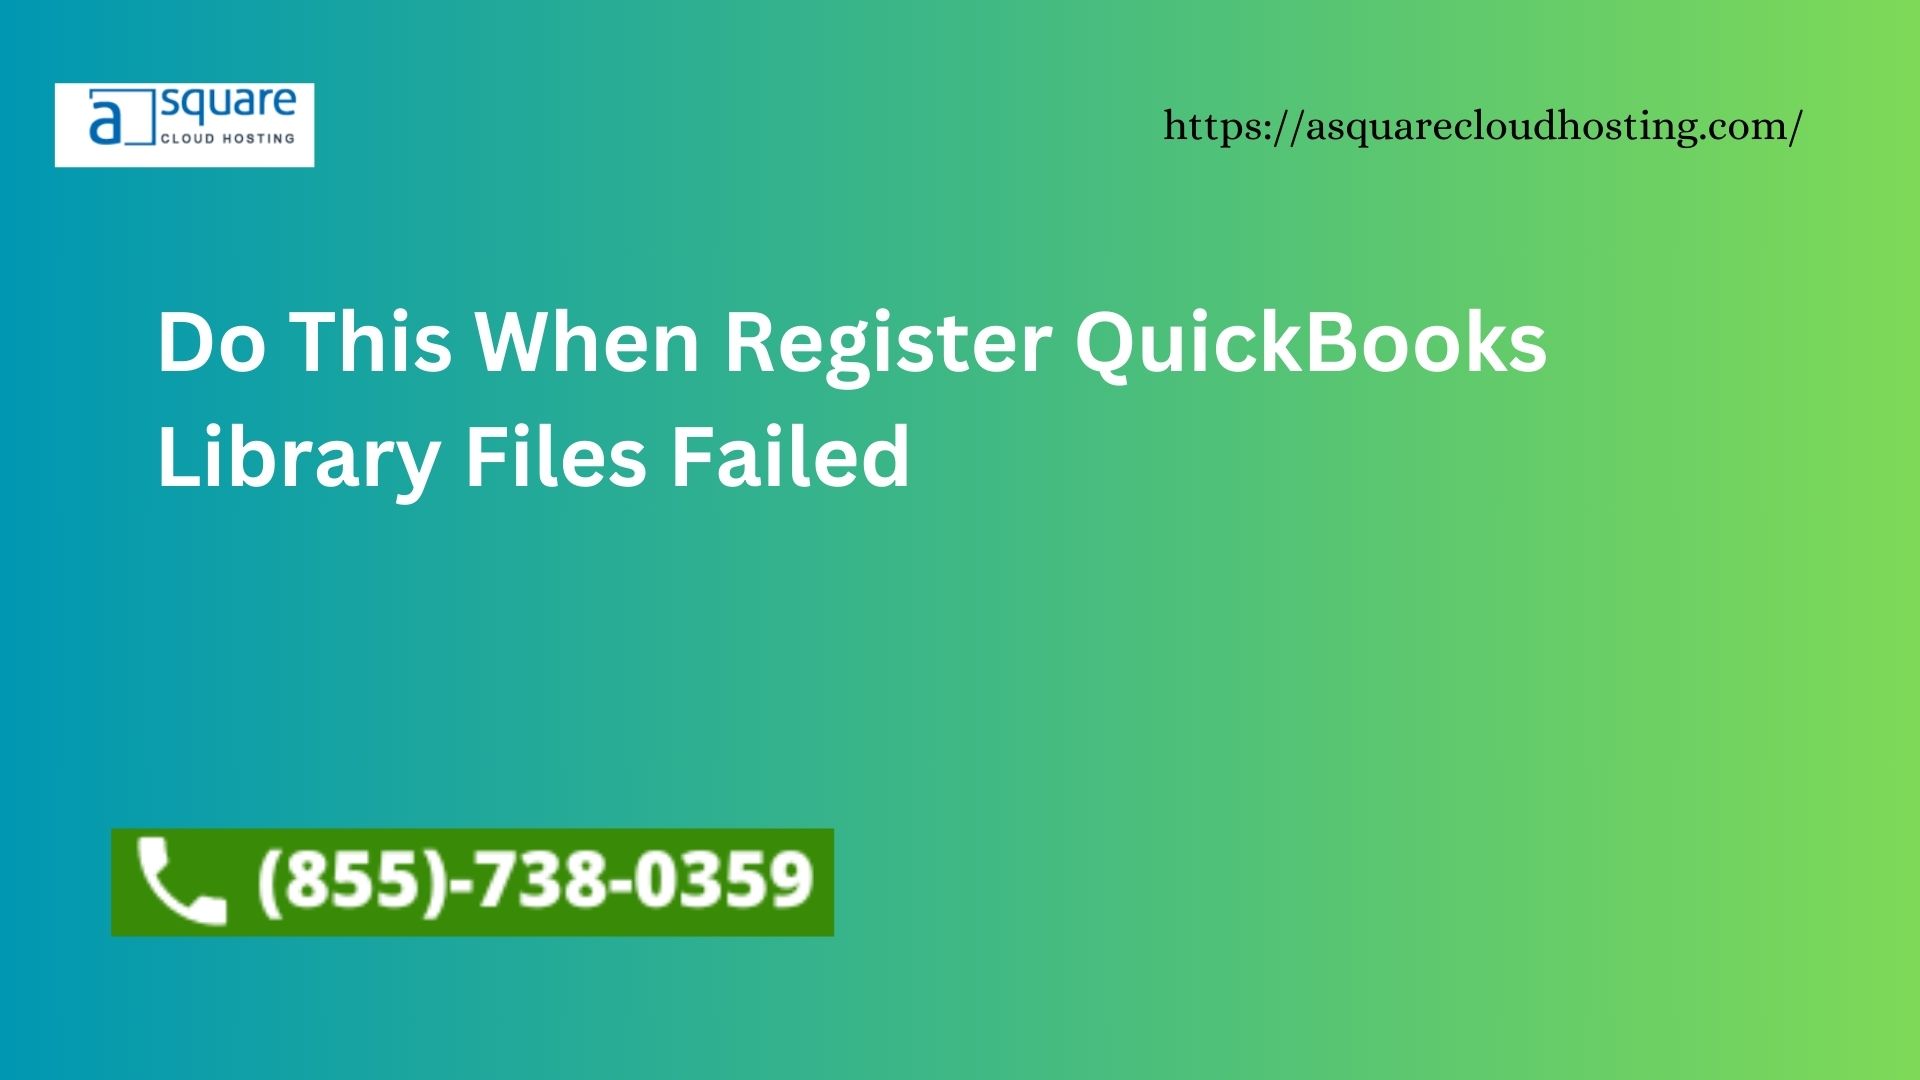 Do This When Register QuickBooks Library Files Failed